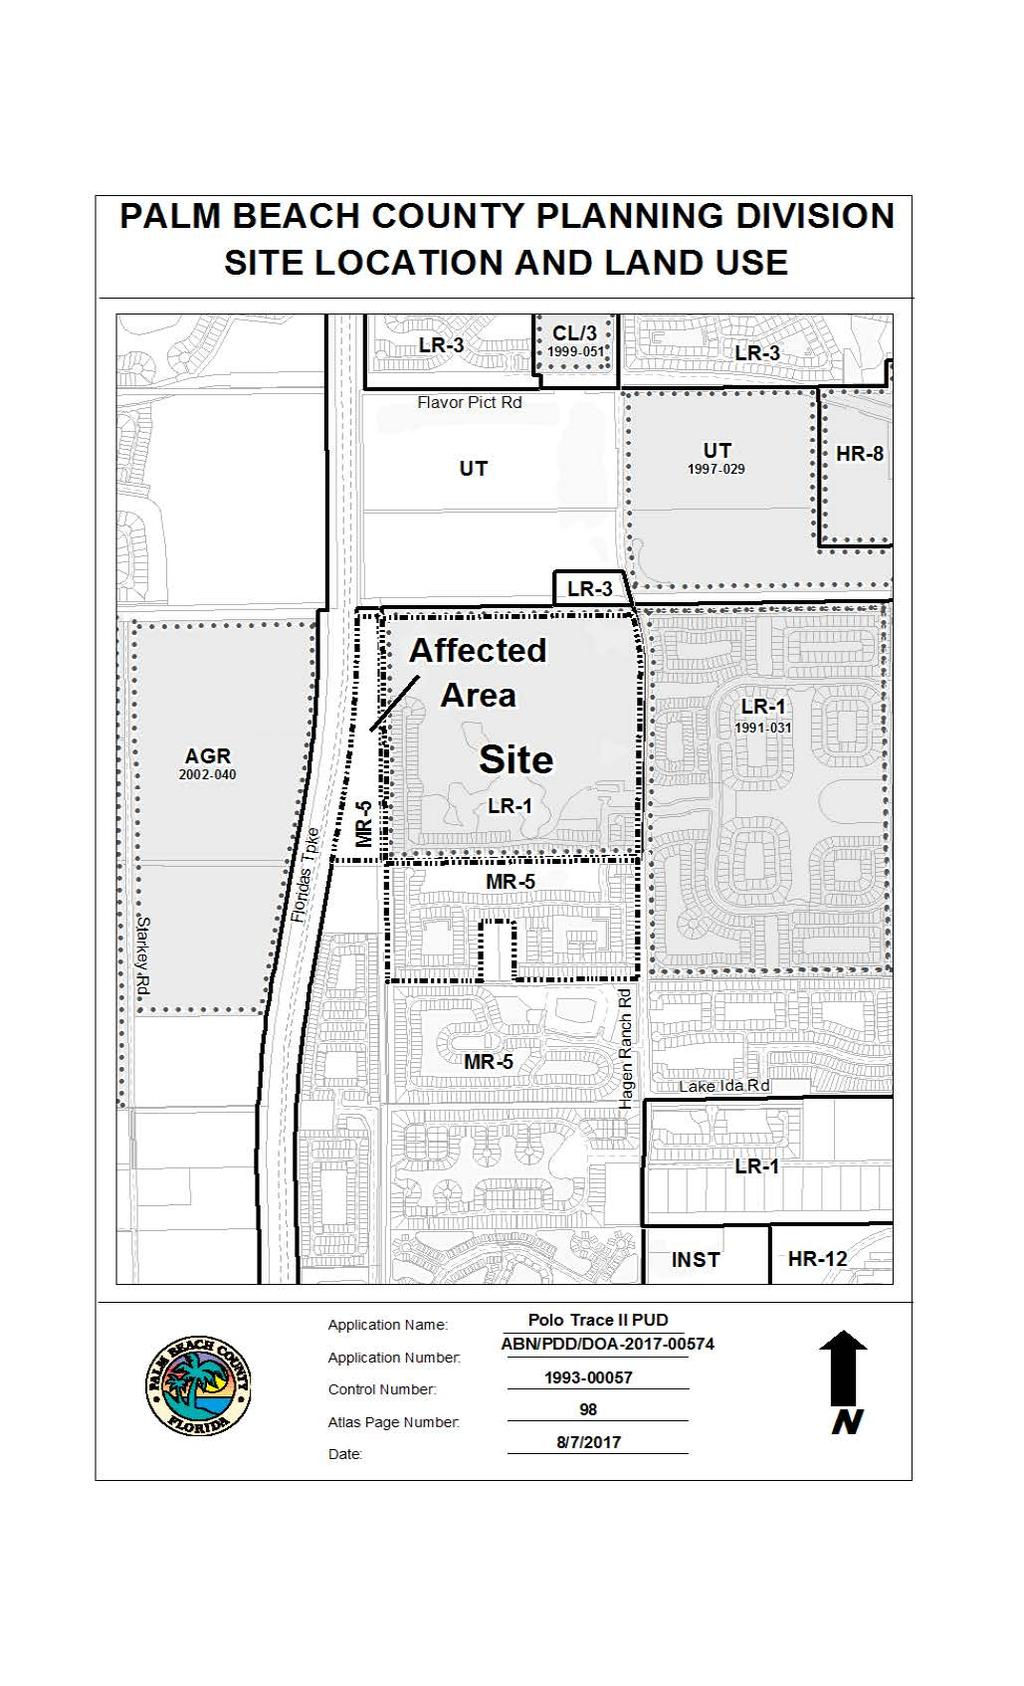 Figure 1: Land Use Map PALM BEACH COUNTY PLANNING DIVISION SITE LOCATION AND LAND USE E UllllllJ ll.ilj.j.jll.w 0 1!